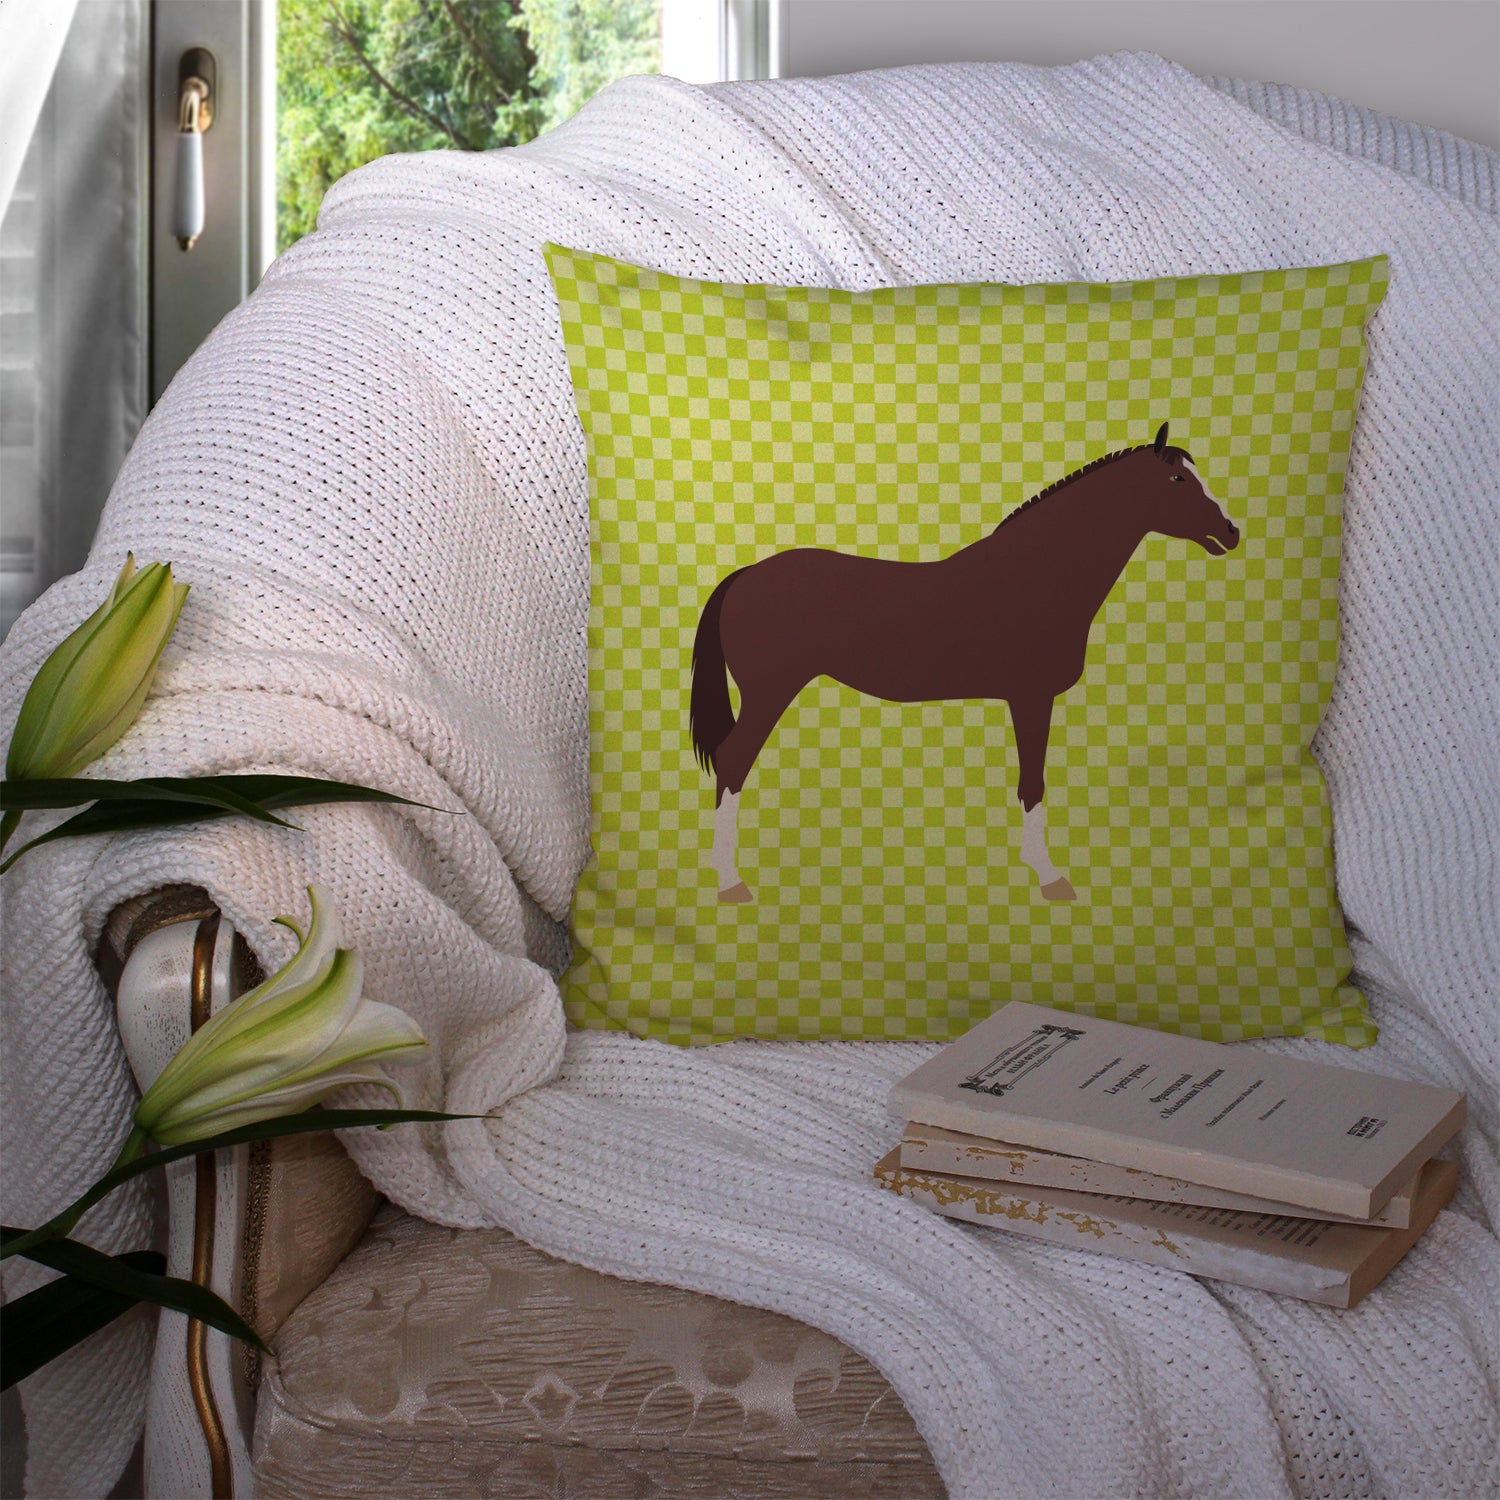 English Thoroughbred Horse Green Fabric Decorative Pillow BB7739PW1414 - the-store.com